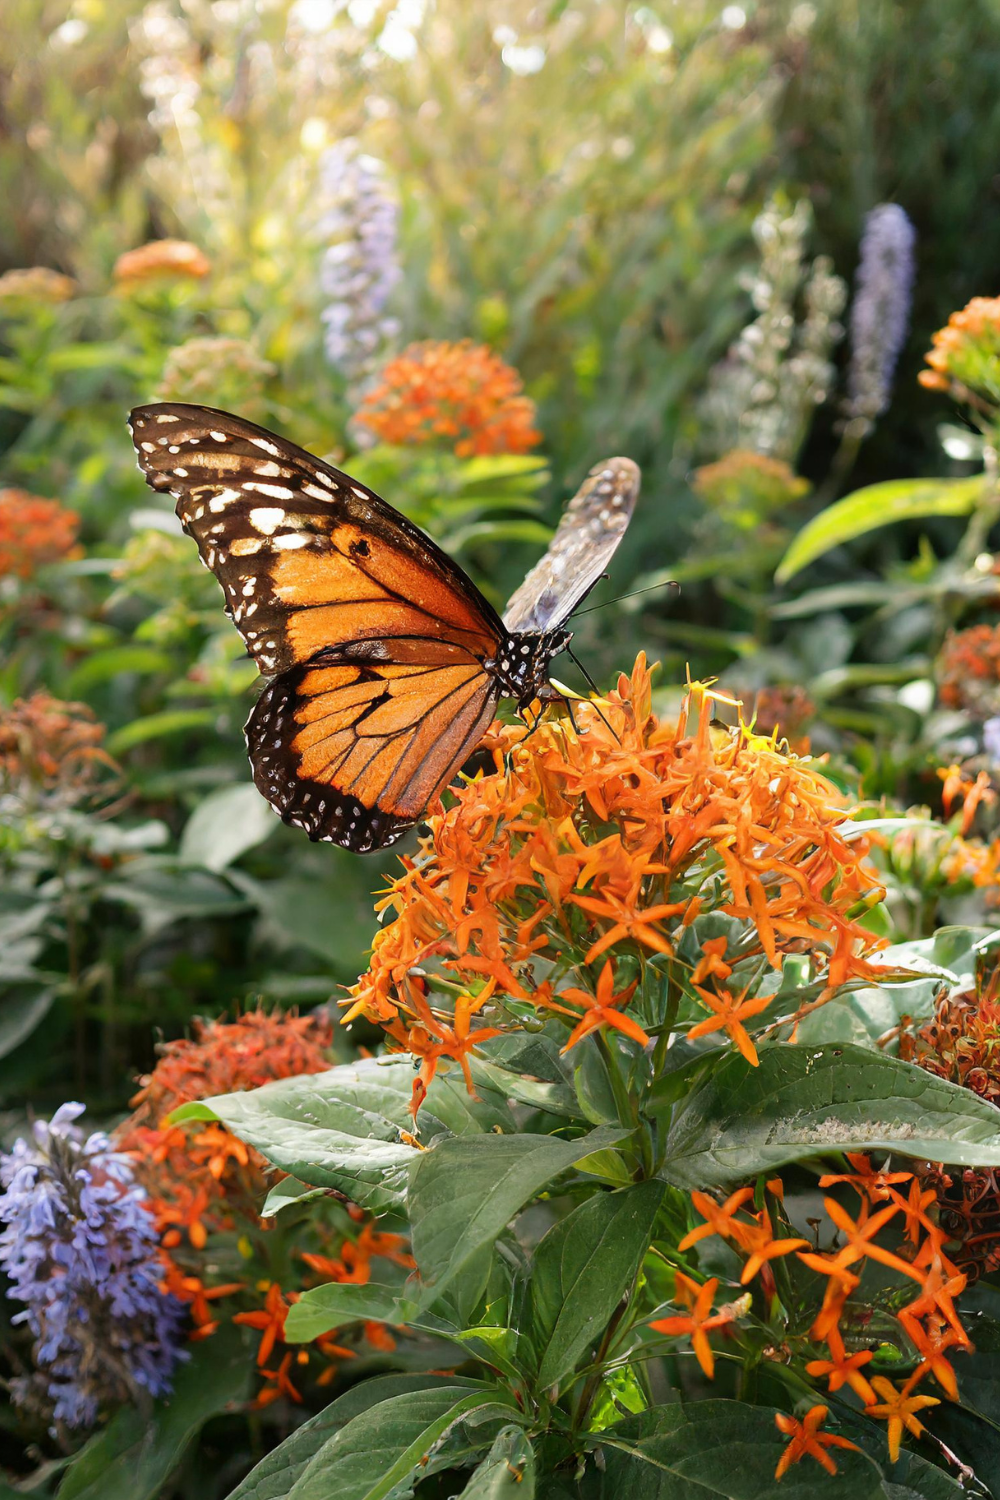 Butterfly and butterfly weed flower